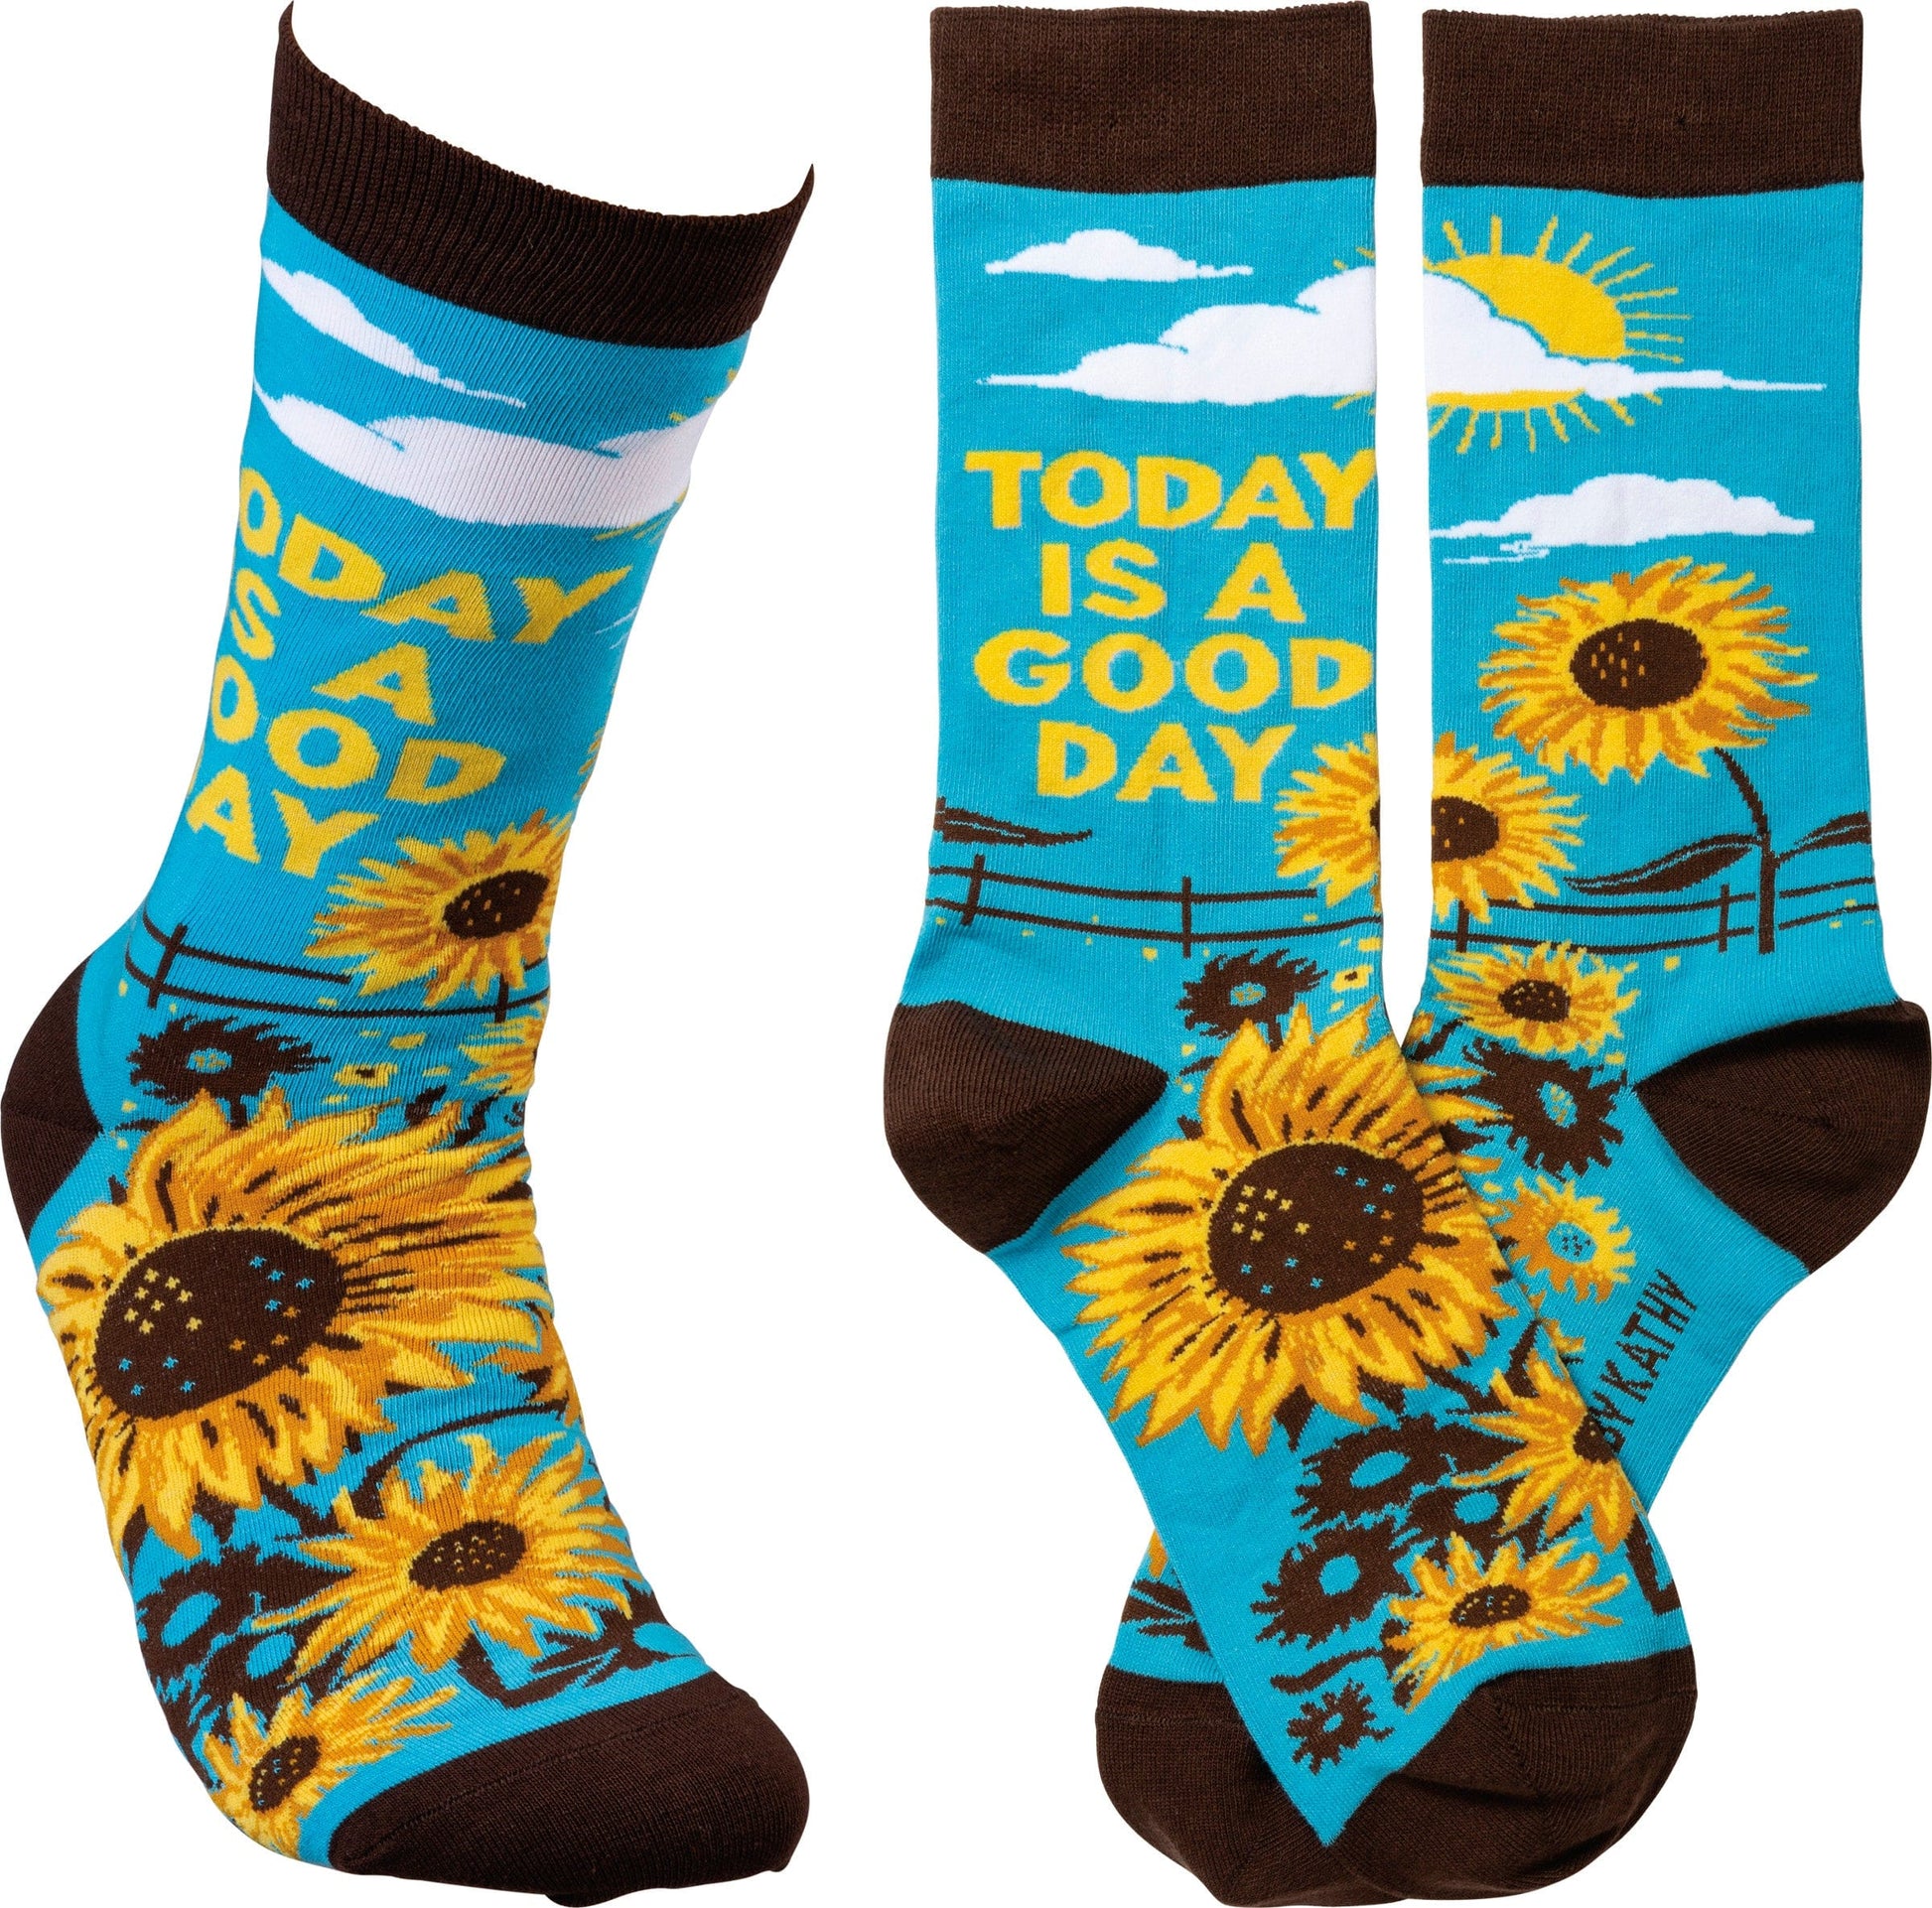 Socks One Size Fits Most Socks - Today Is A Good Day PBK-105096